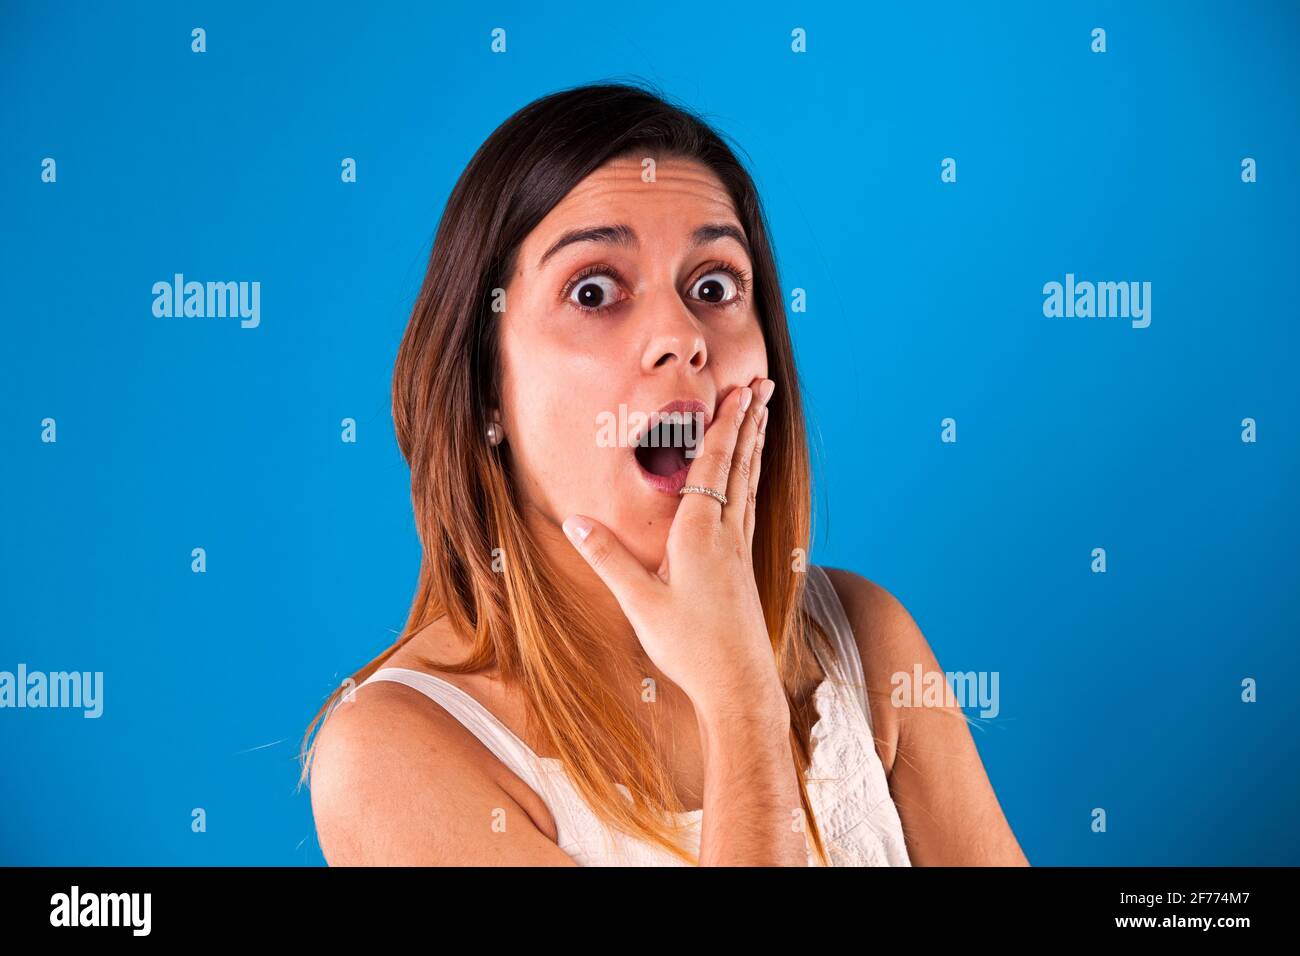 Surprised young woman with a blue background Stock Photo